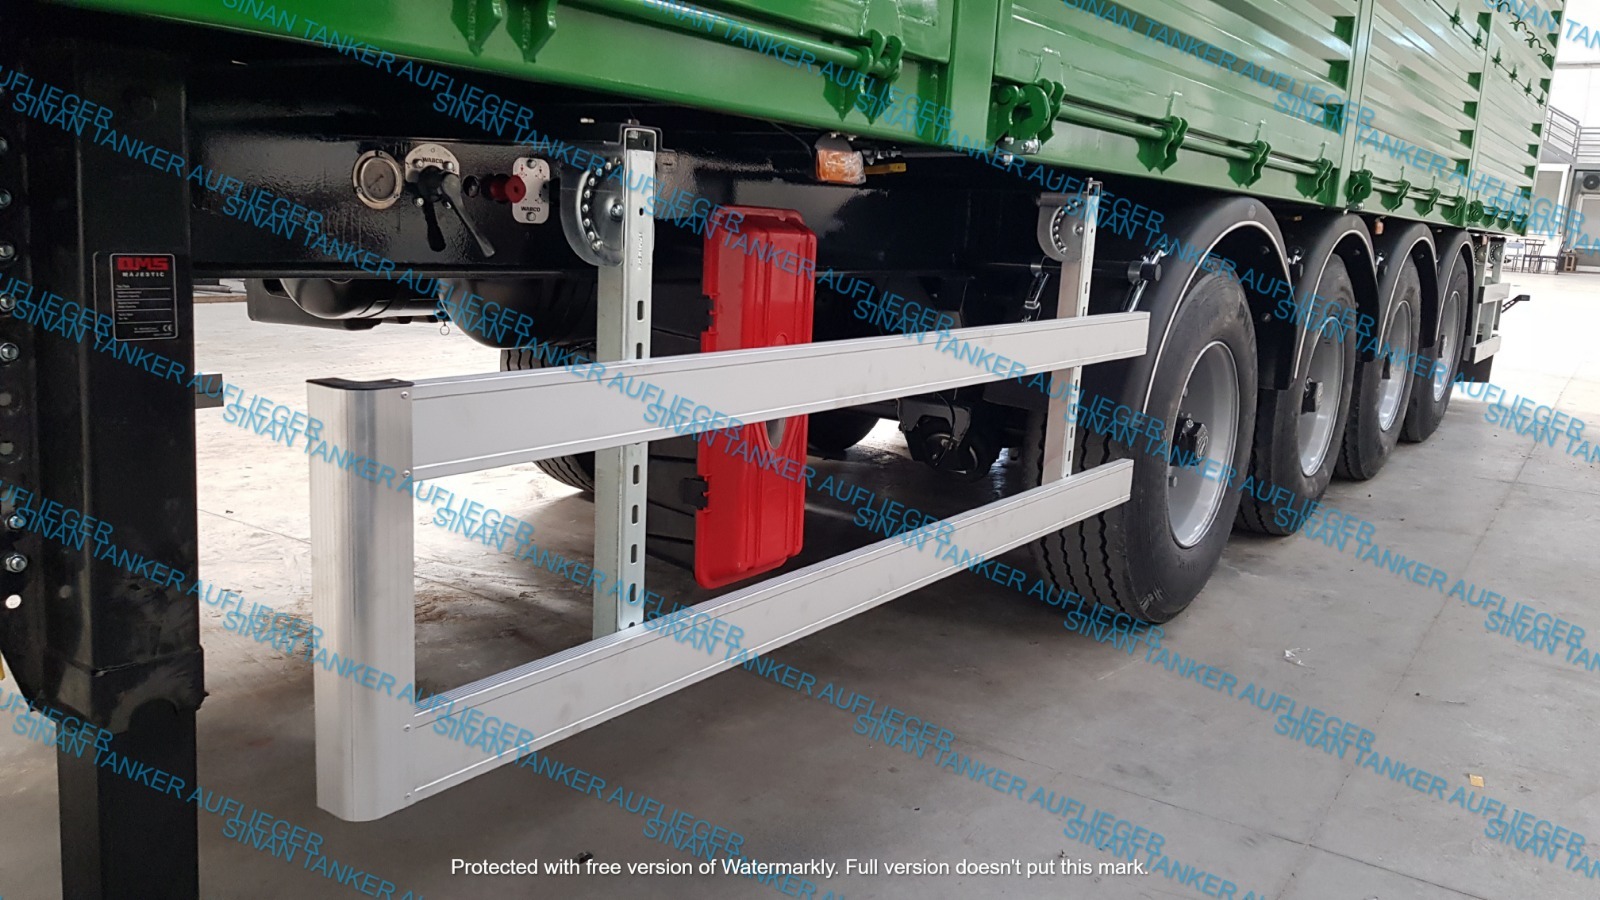 SİNANLI TANKER - TRAILER undefined: photos 15